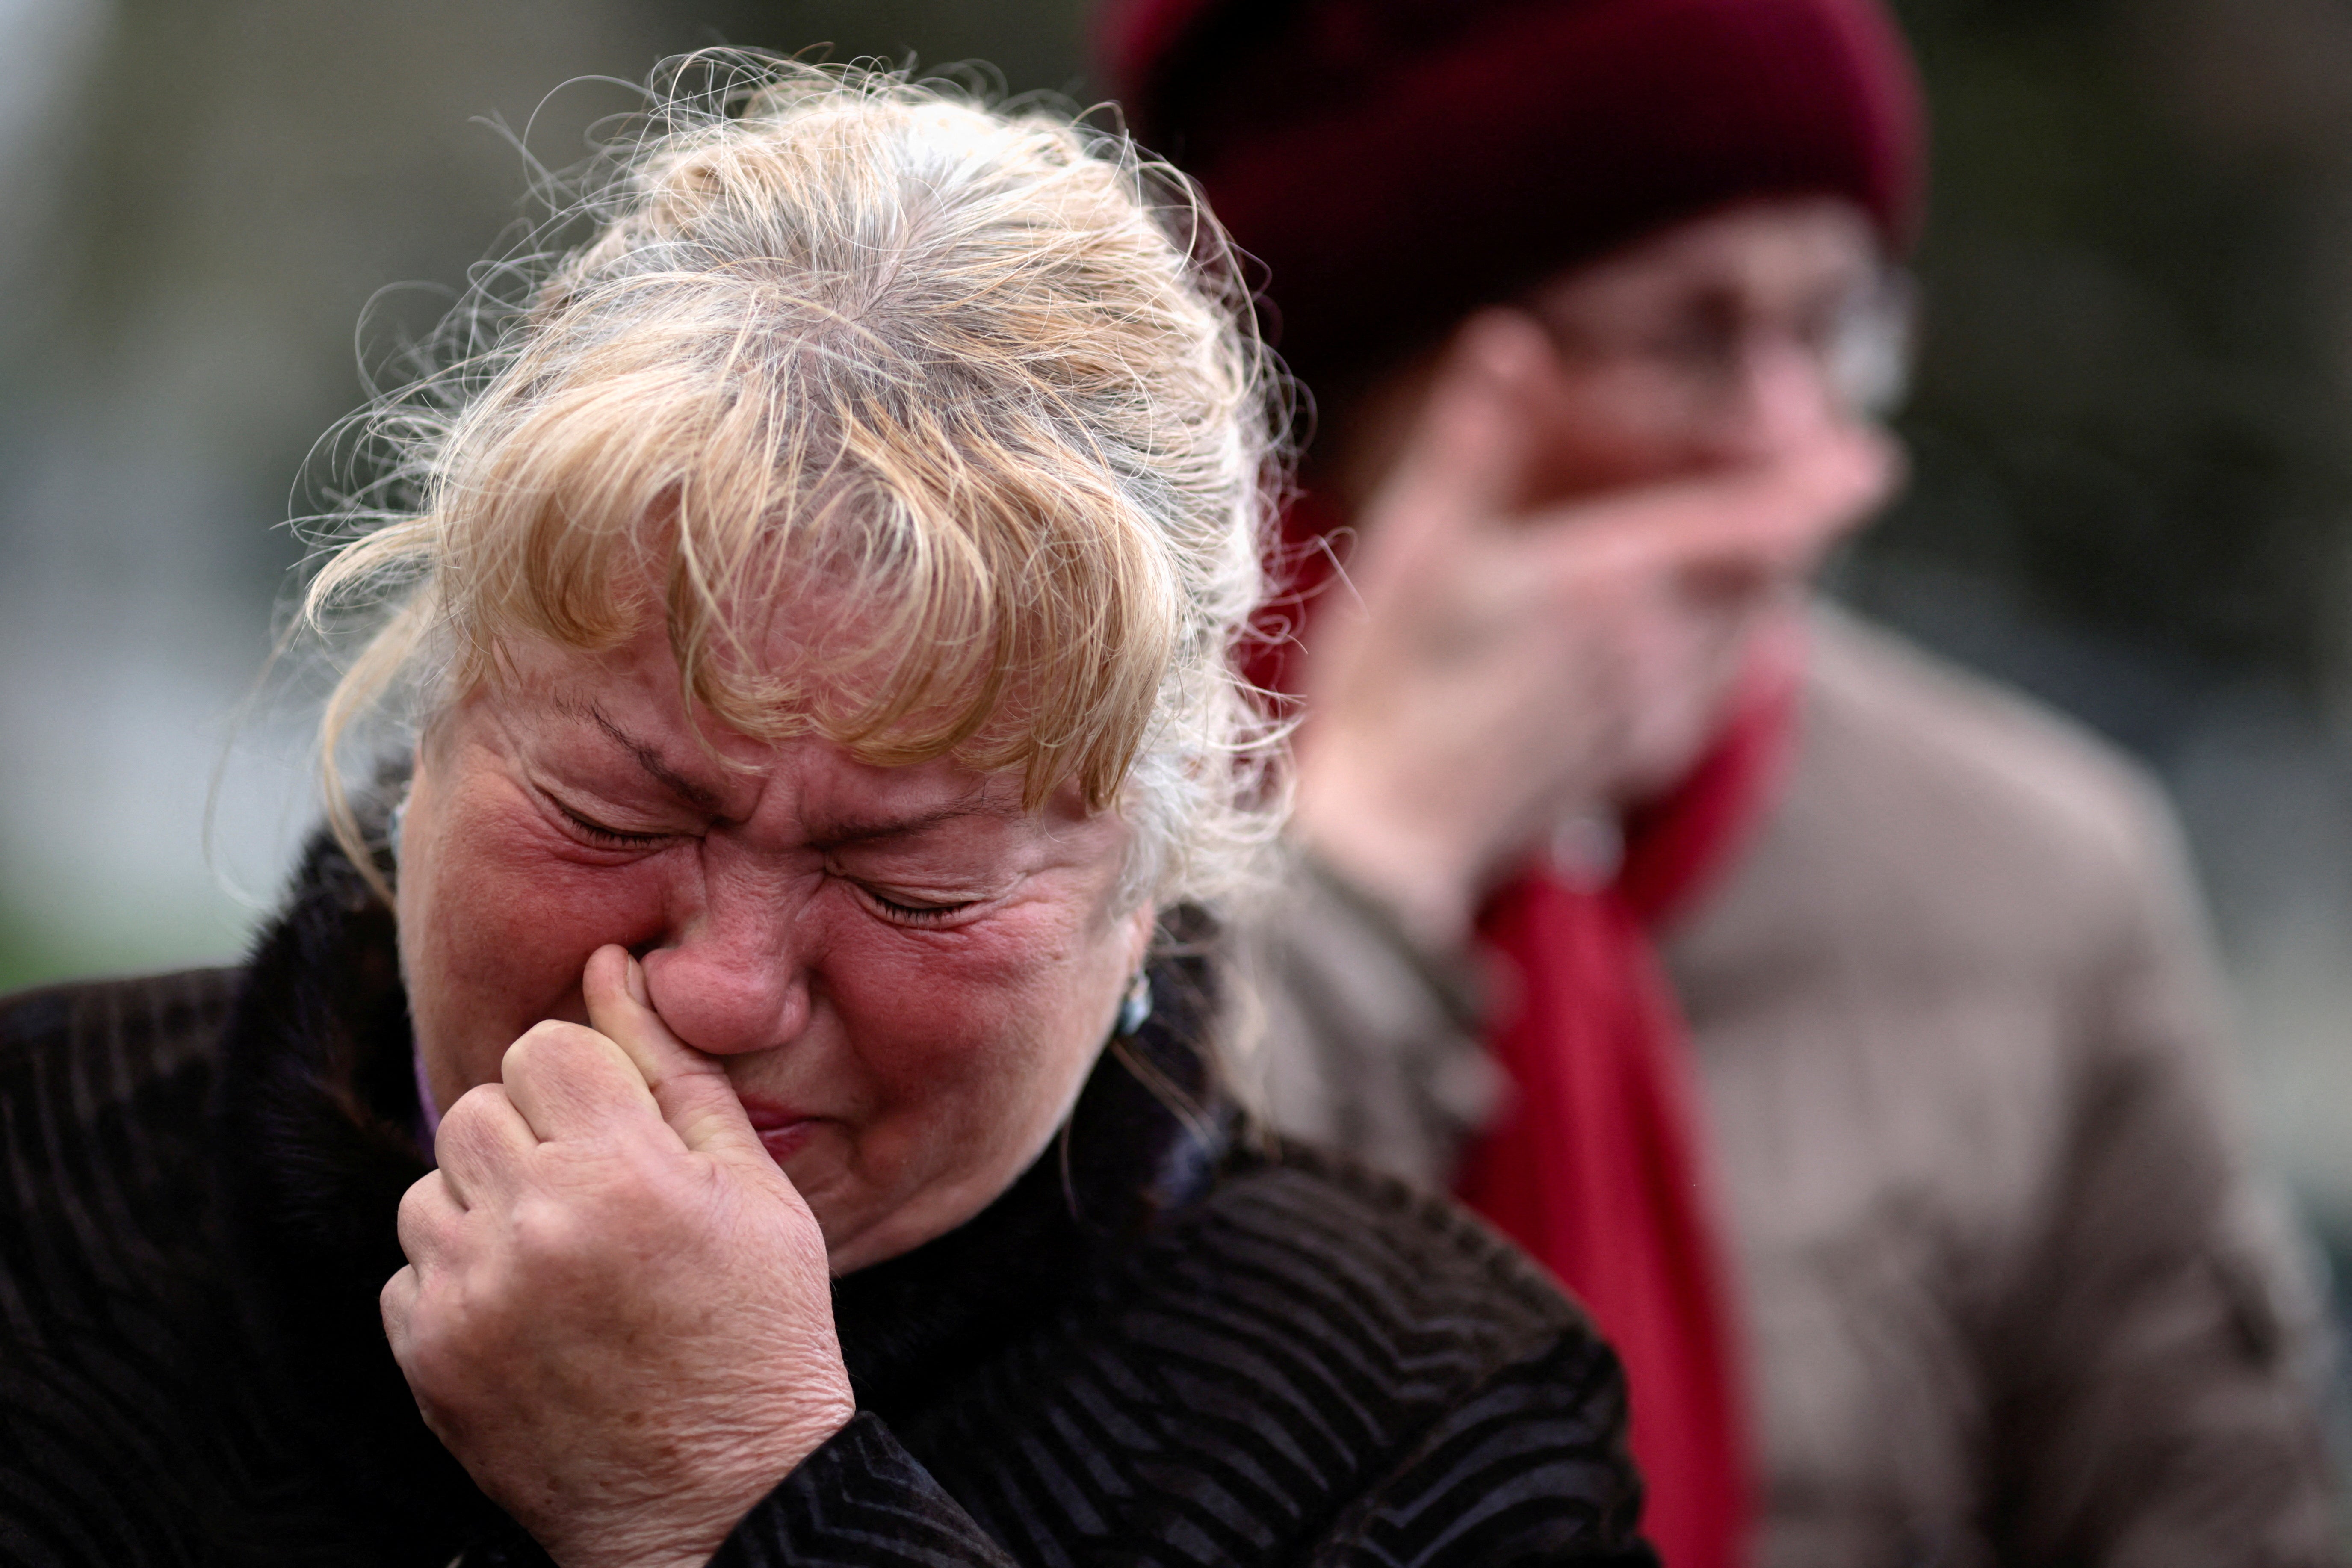 Women react during the funeral of Ukrainian army officer Vyacheslav Vyacheslavovych Dimov, who was killed on 16 April in battle in the Vasylivka district of Zaporizhzhia region